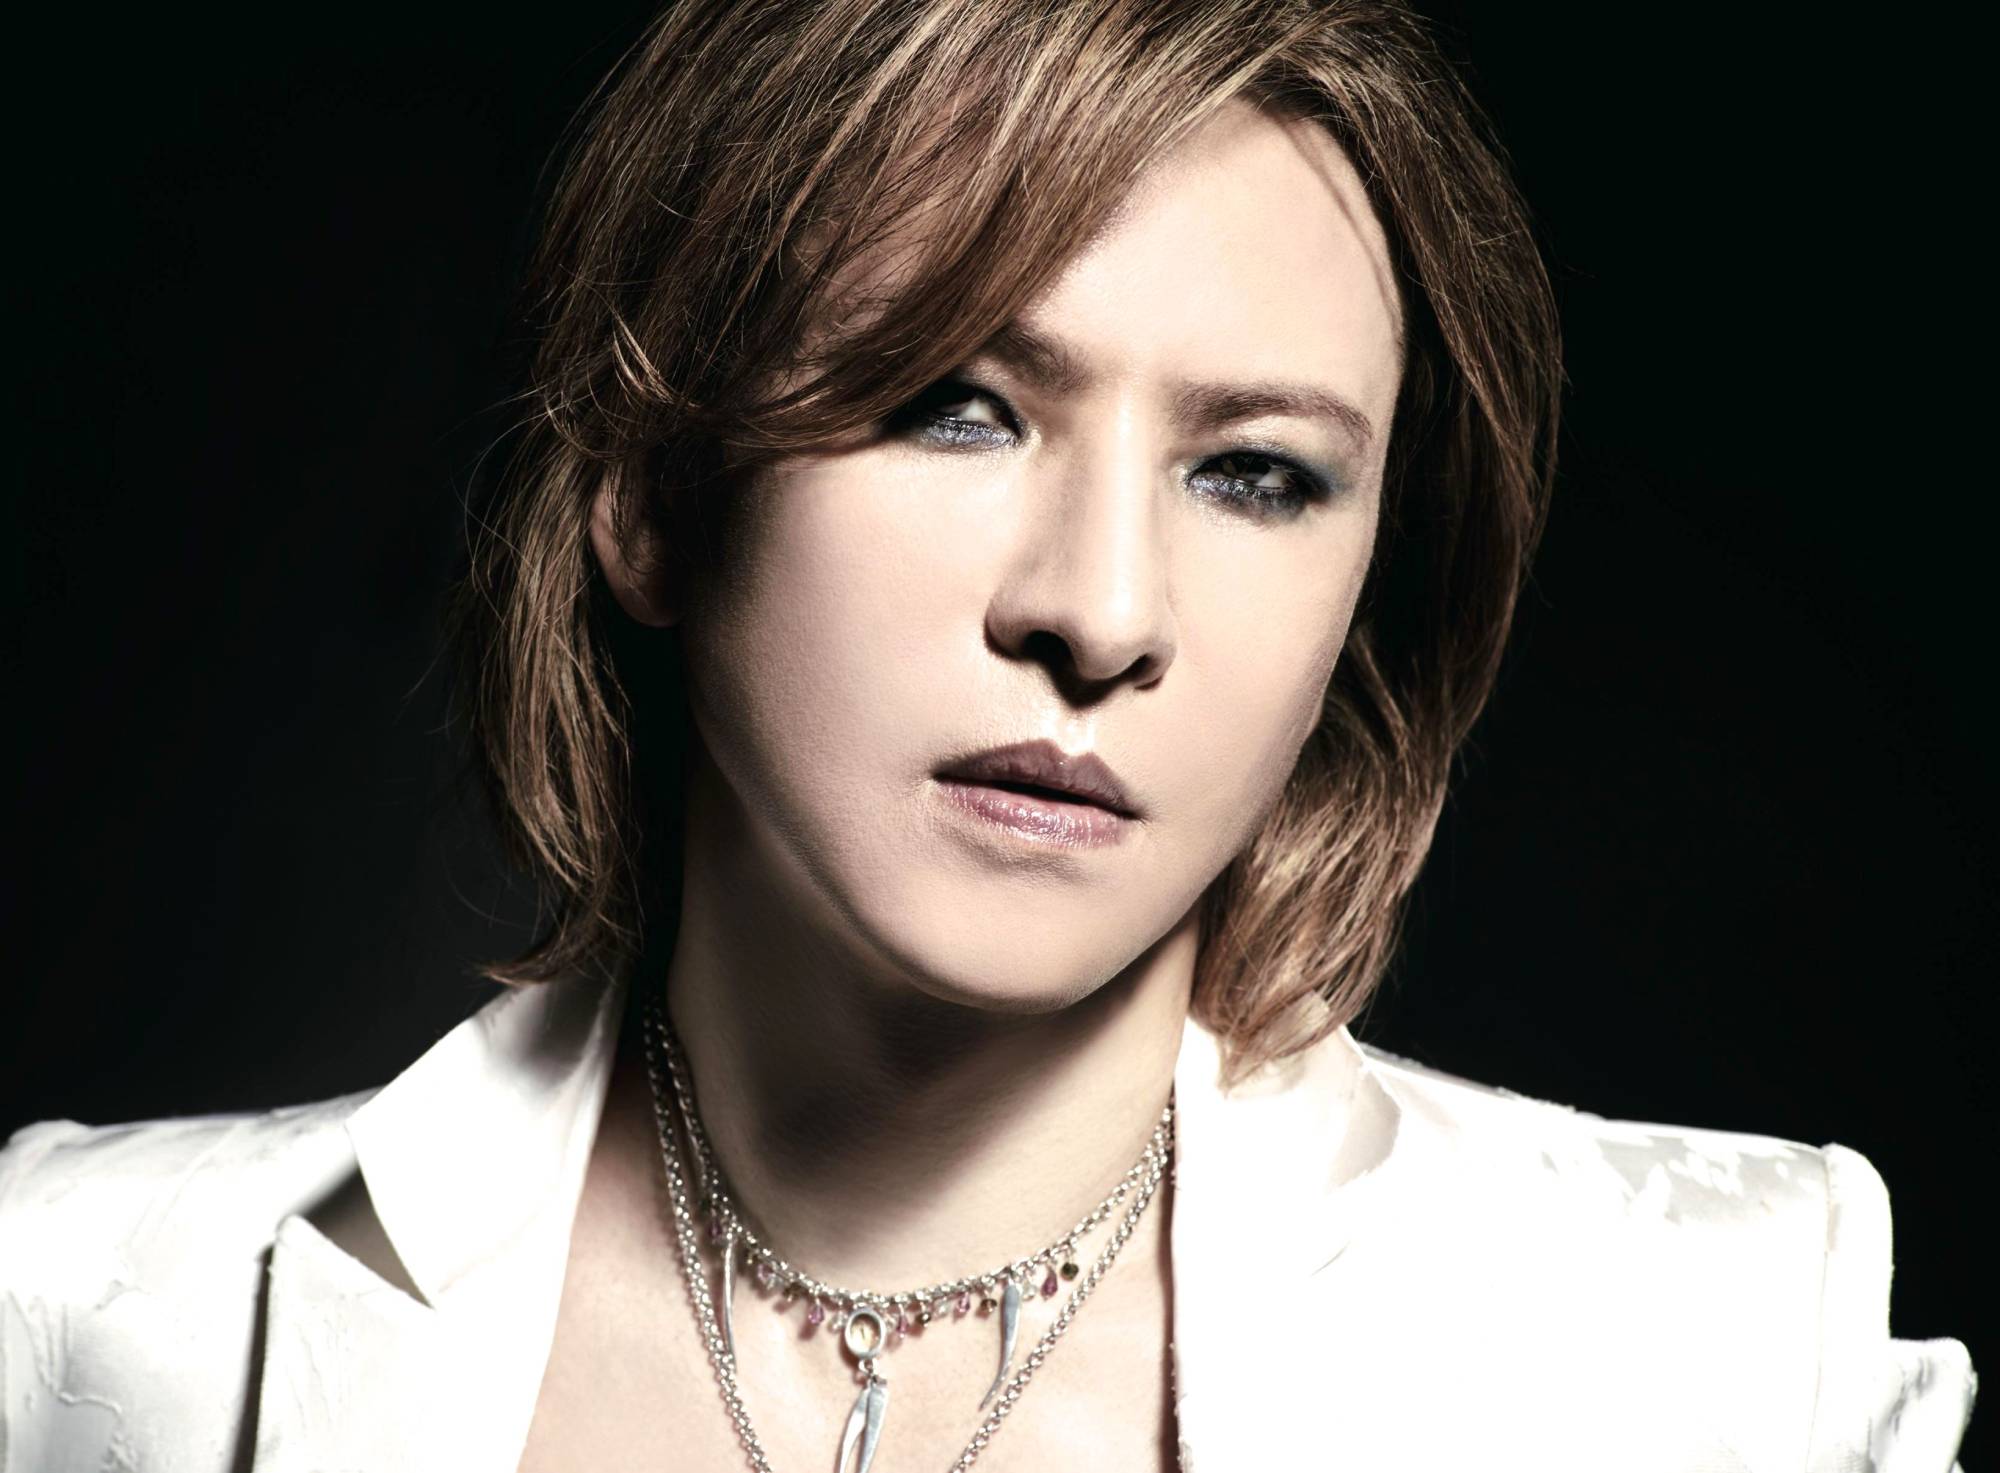 Difficult past: Yoshiki set up a charitable foundation in the United States, spurred on by the memory of his father's suicide. | COURTESY OF YOSHIKI